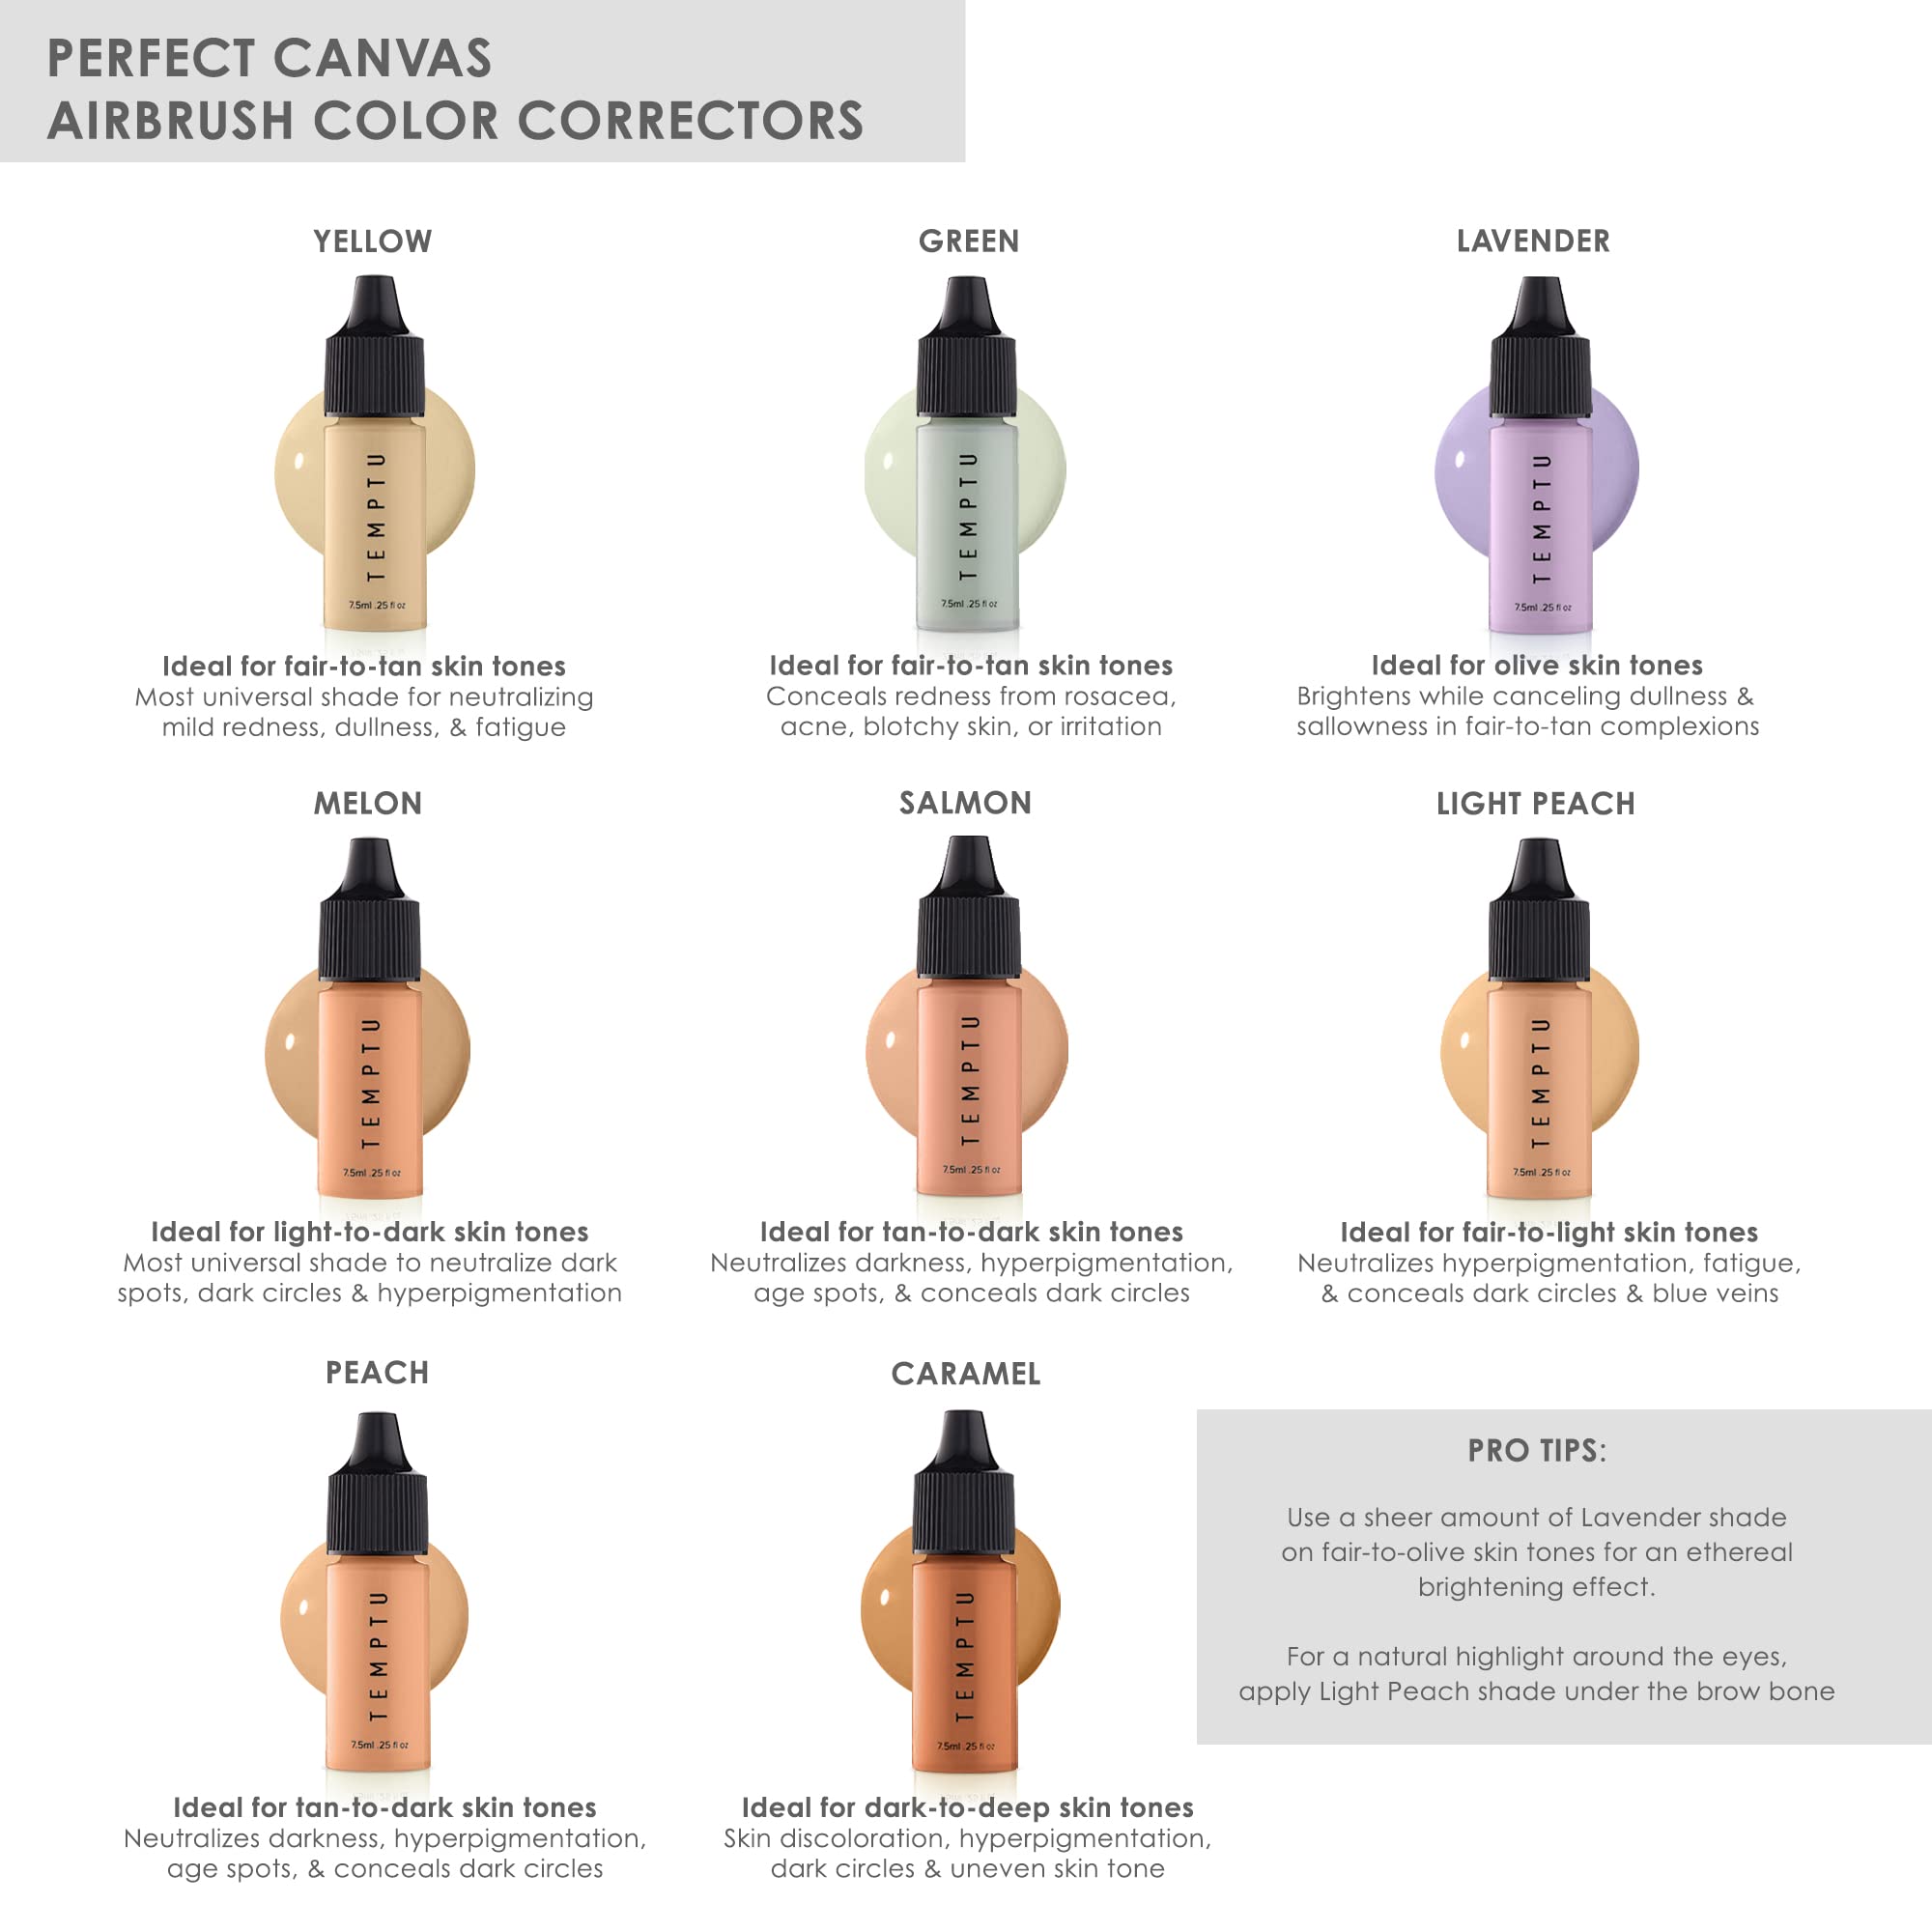 TEMPTU Perfect Canvas Airbrush Color Correctors Starter Set: Long-Wear, High-Performance Airbrush Color Correctors | Weightless Color Correction For Skin Discoloration | 7 Shades